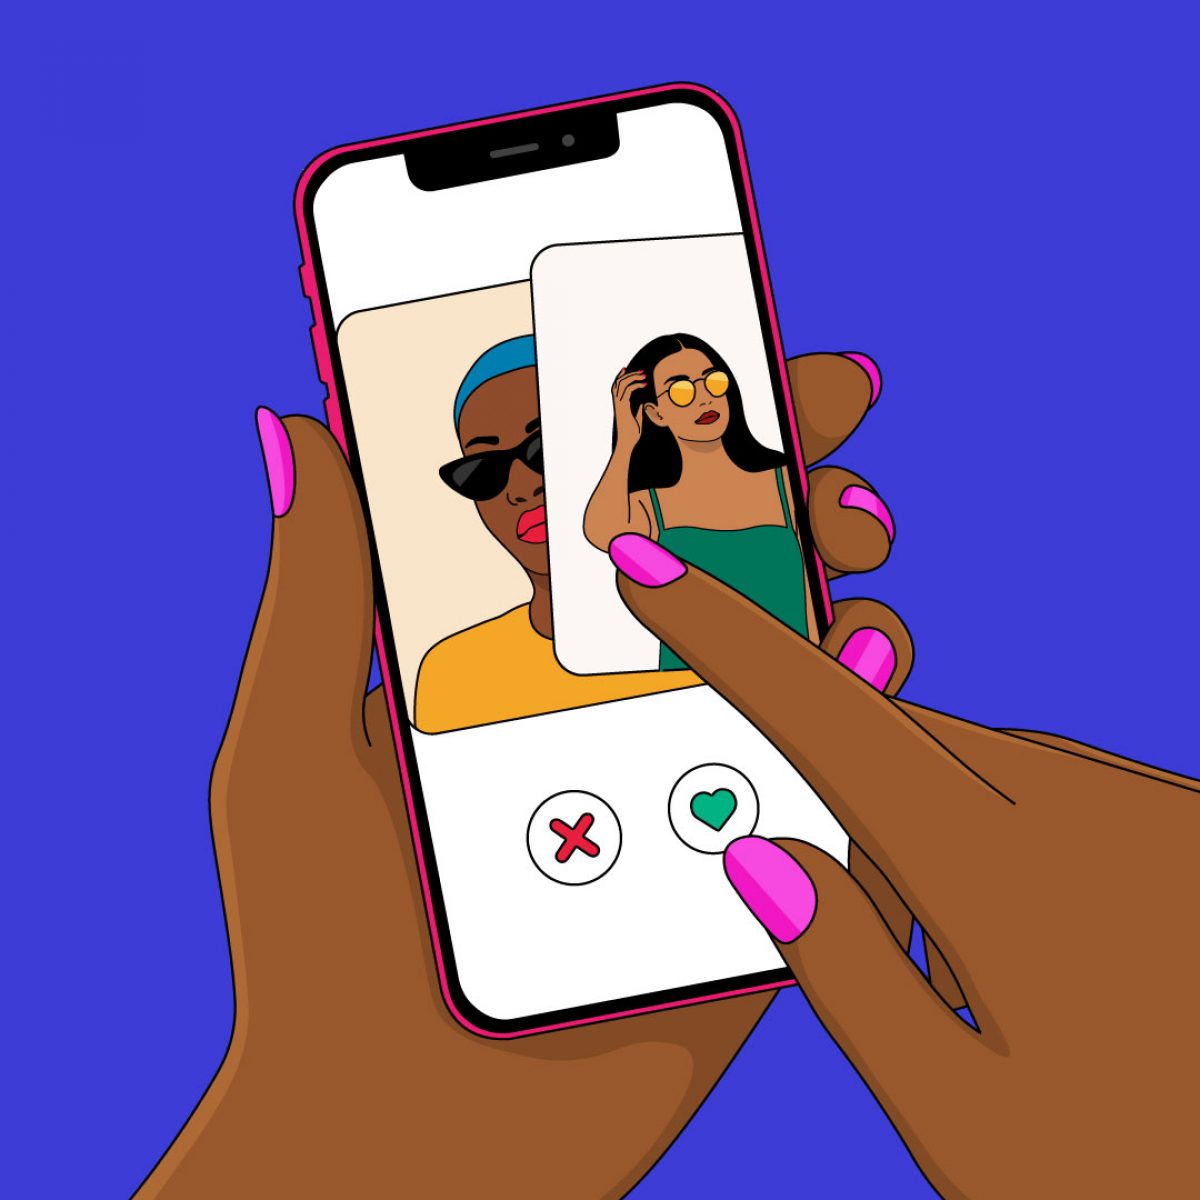 Tinder's testing 'blind dating' feature, while rivals focus on user privacy  — The Queer Sensualist